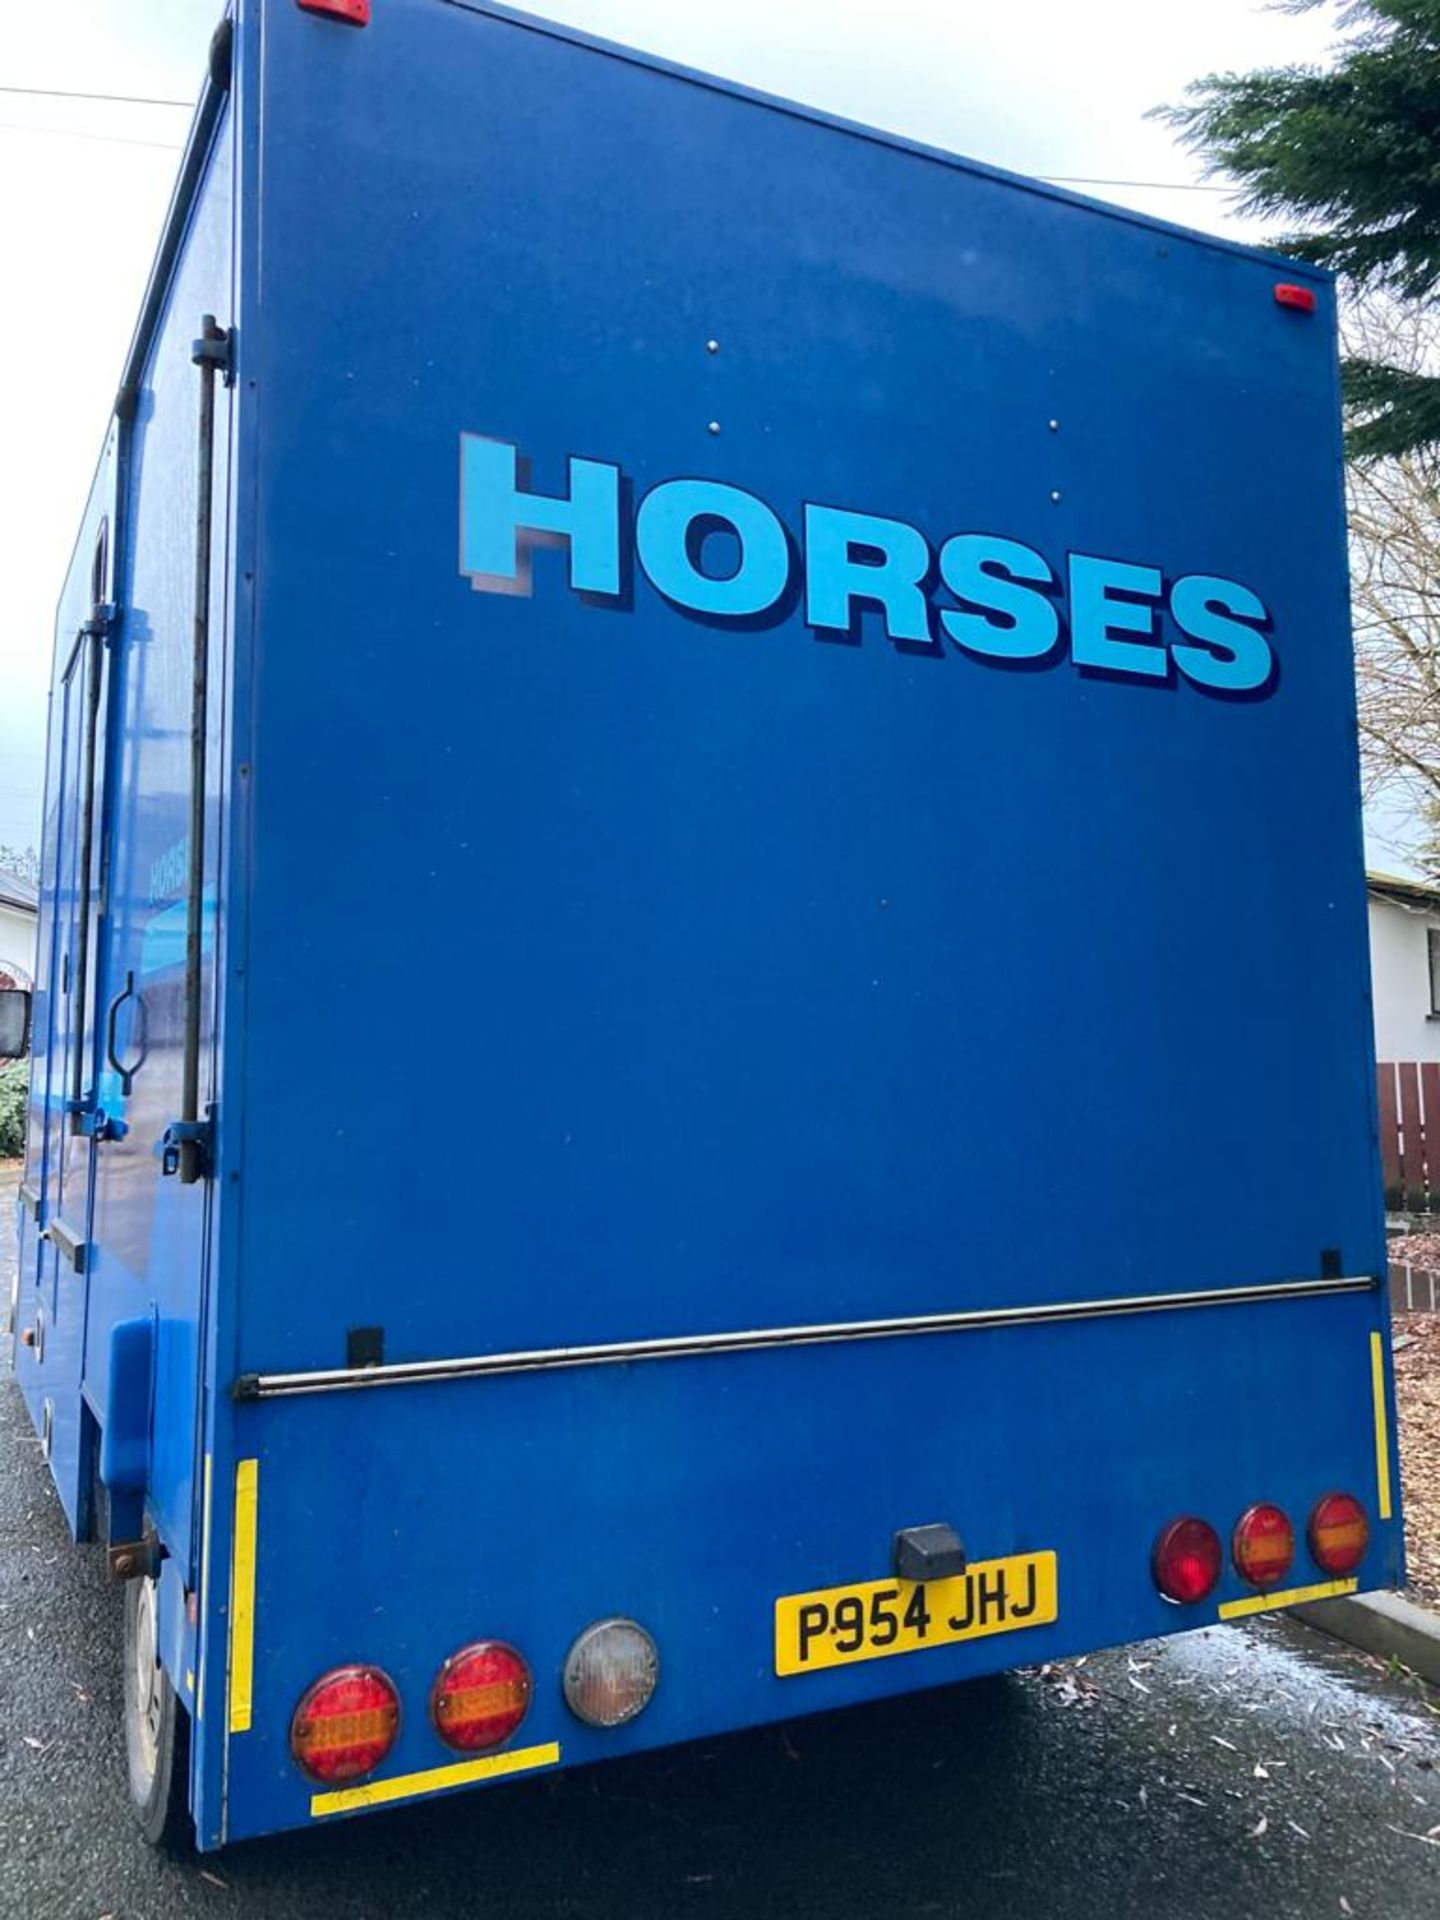 HORSEBOX TWO STALL IVECO .LOCATION NORTHERN IRELAND. - Image 4 of 4